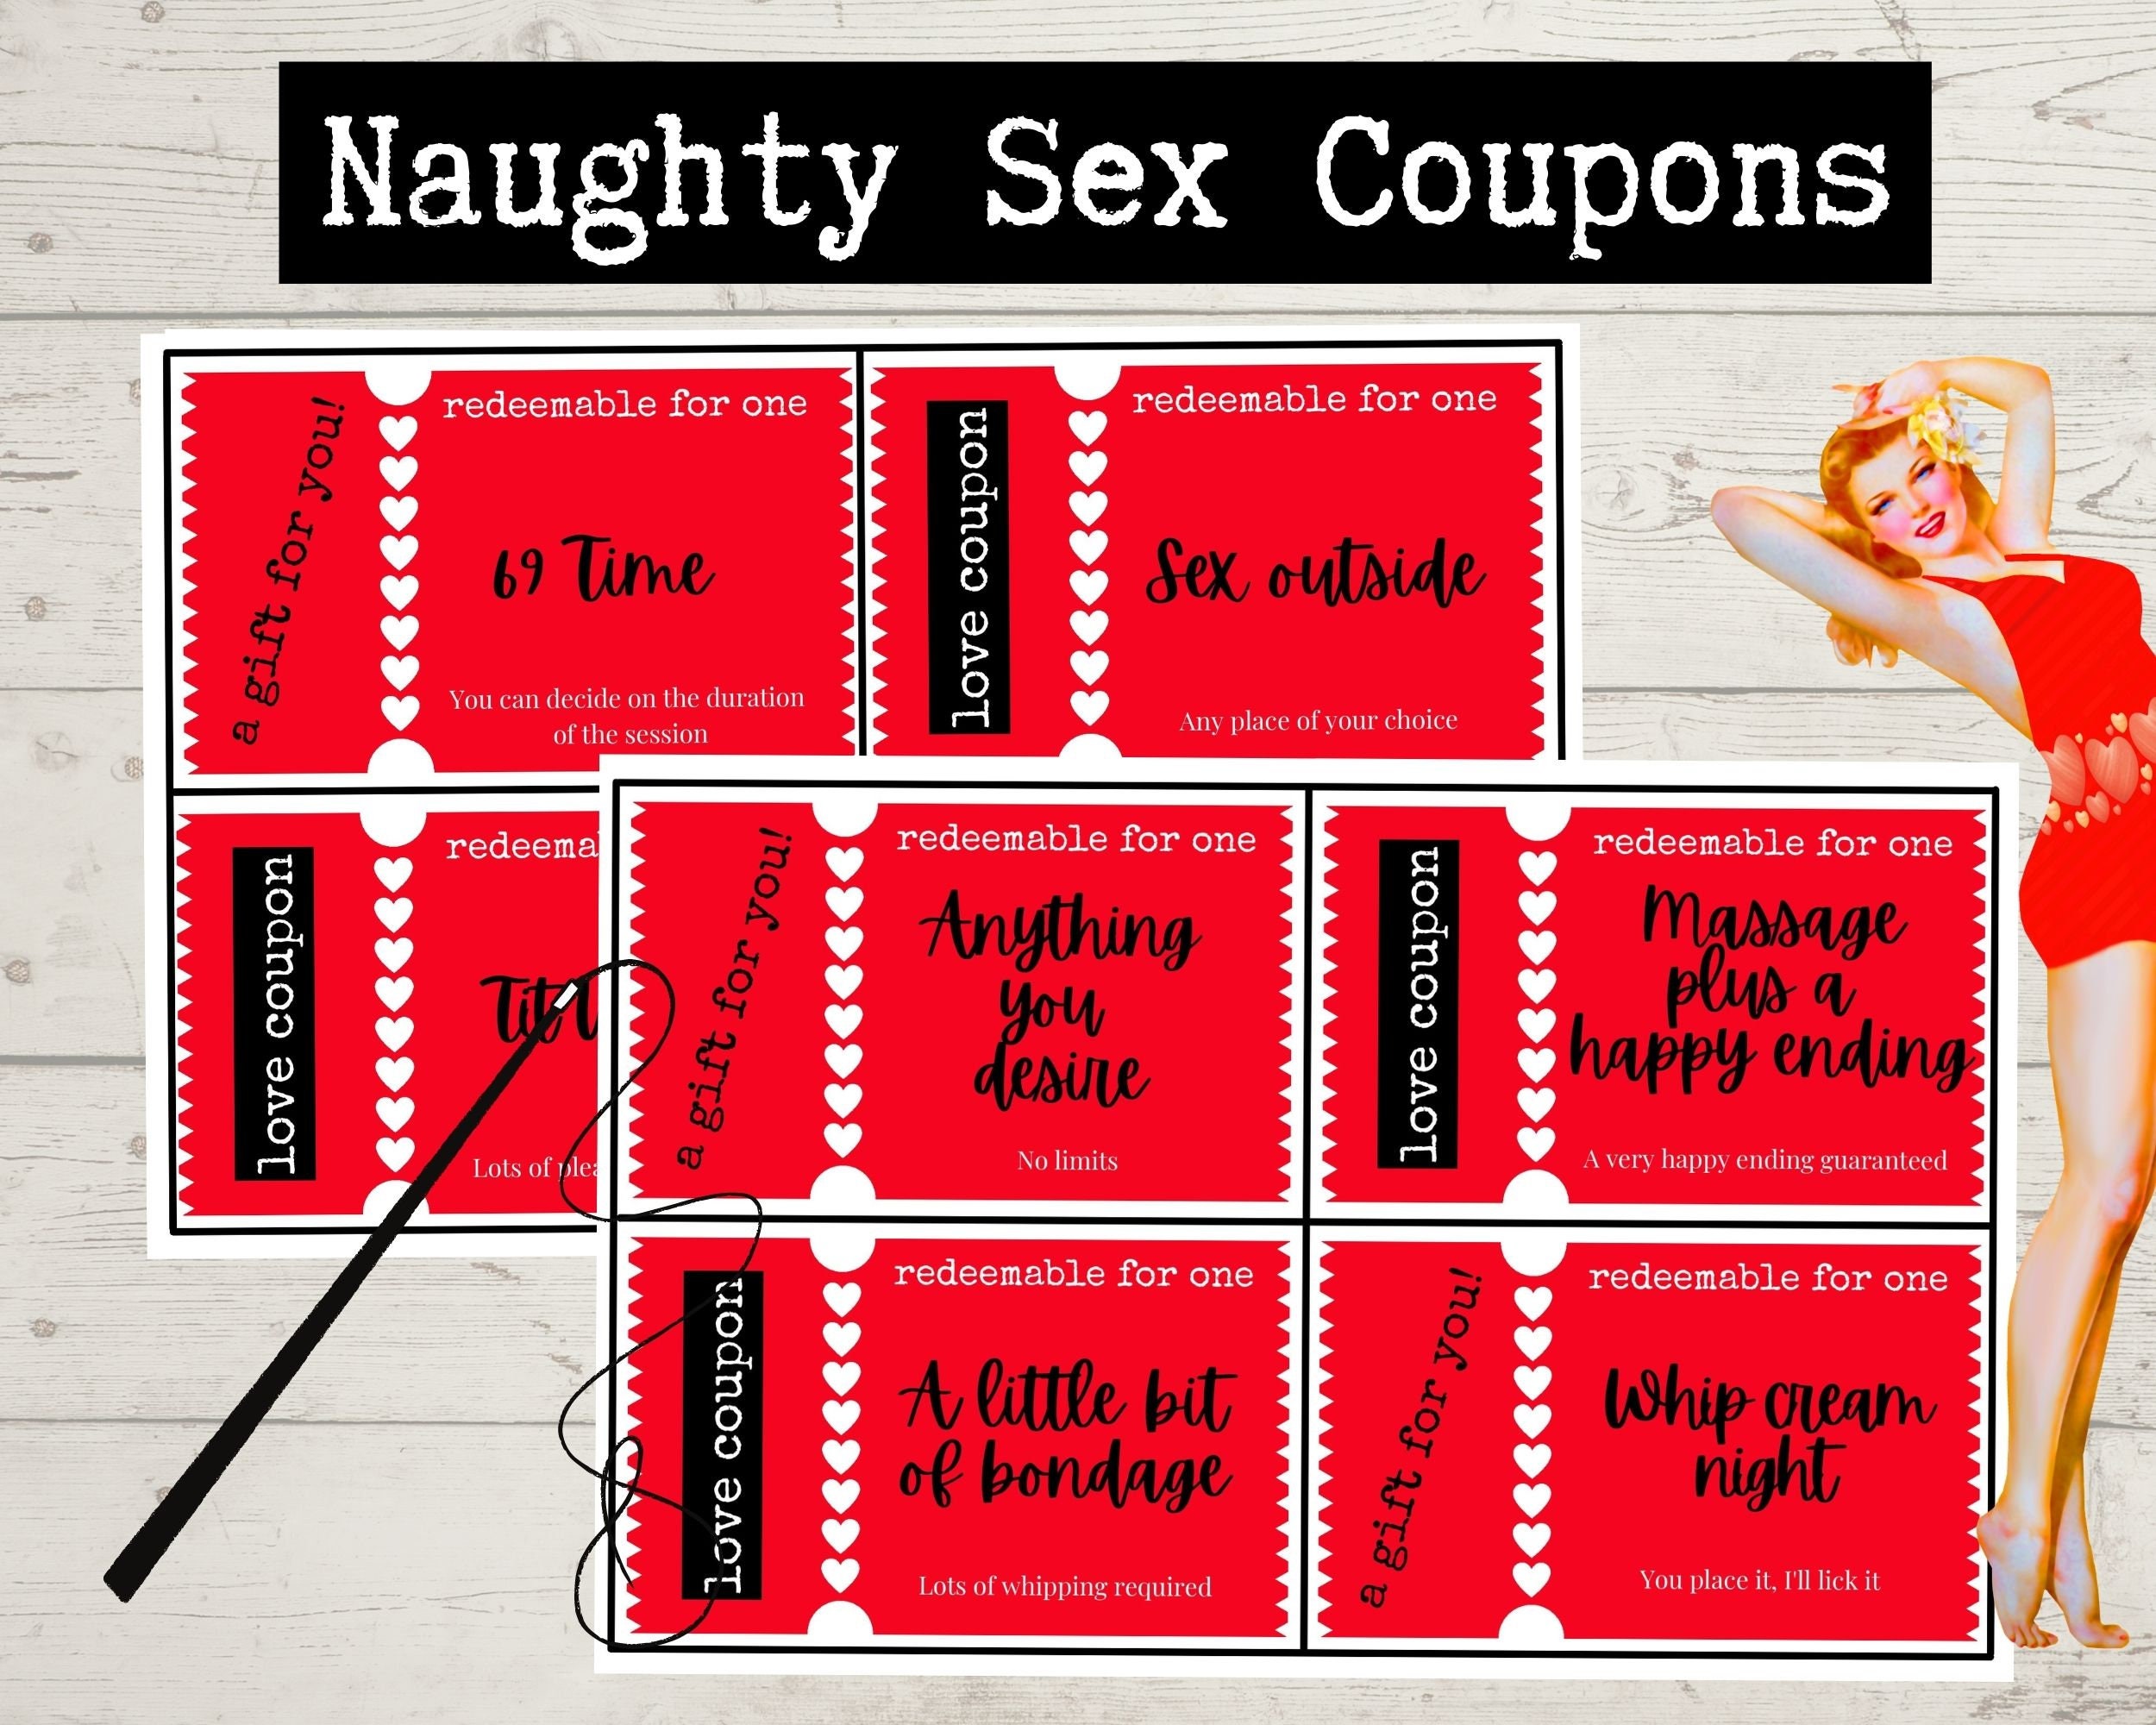 homemade coupons sexual favors Sex Pics Hd